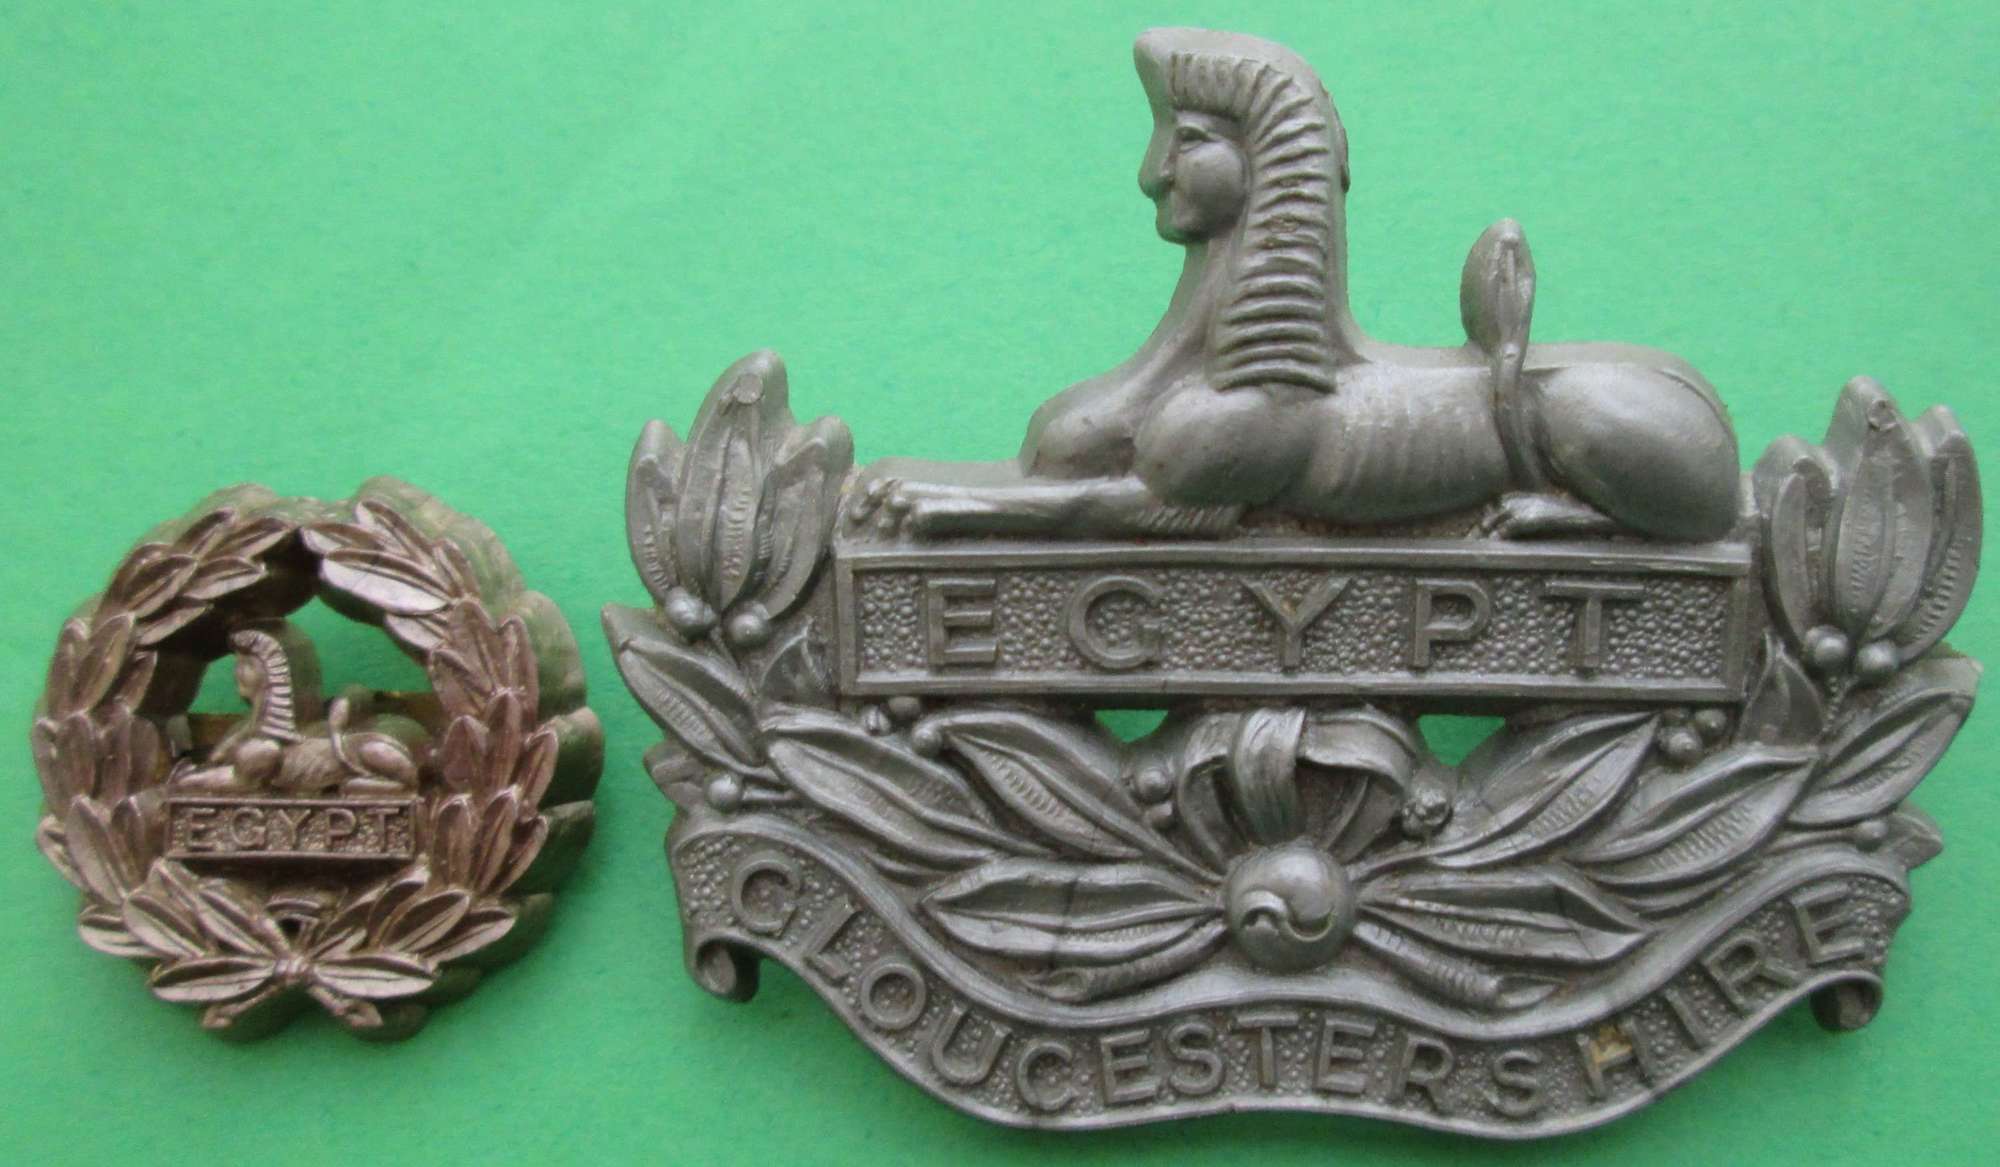 WWII PERIOD PLASTIC GLOUCESTERSHIRE CAP AND REAR BADGE